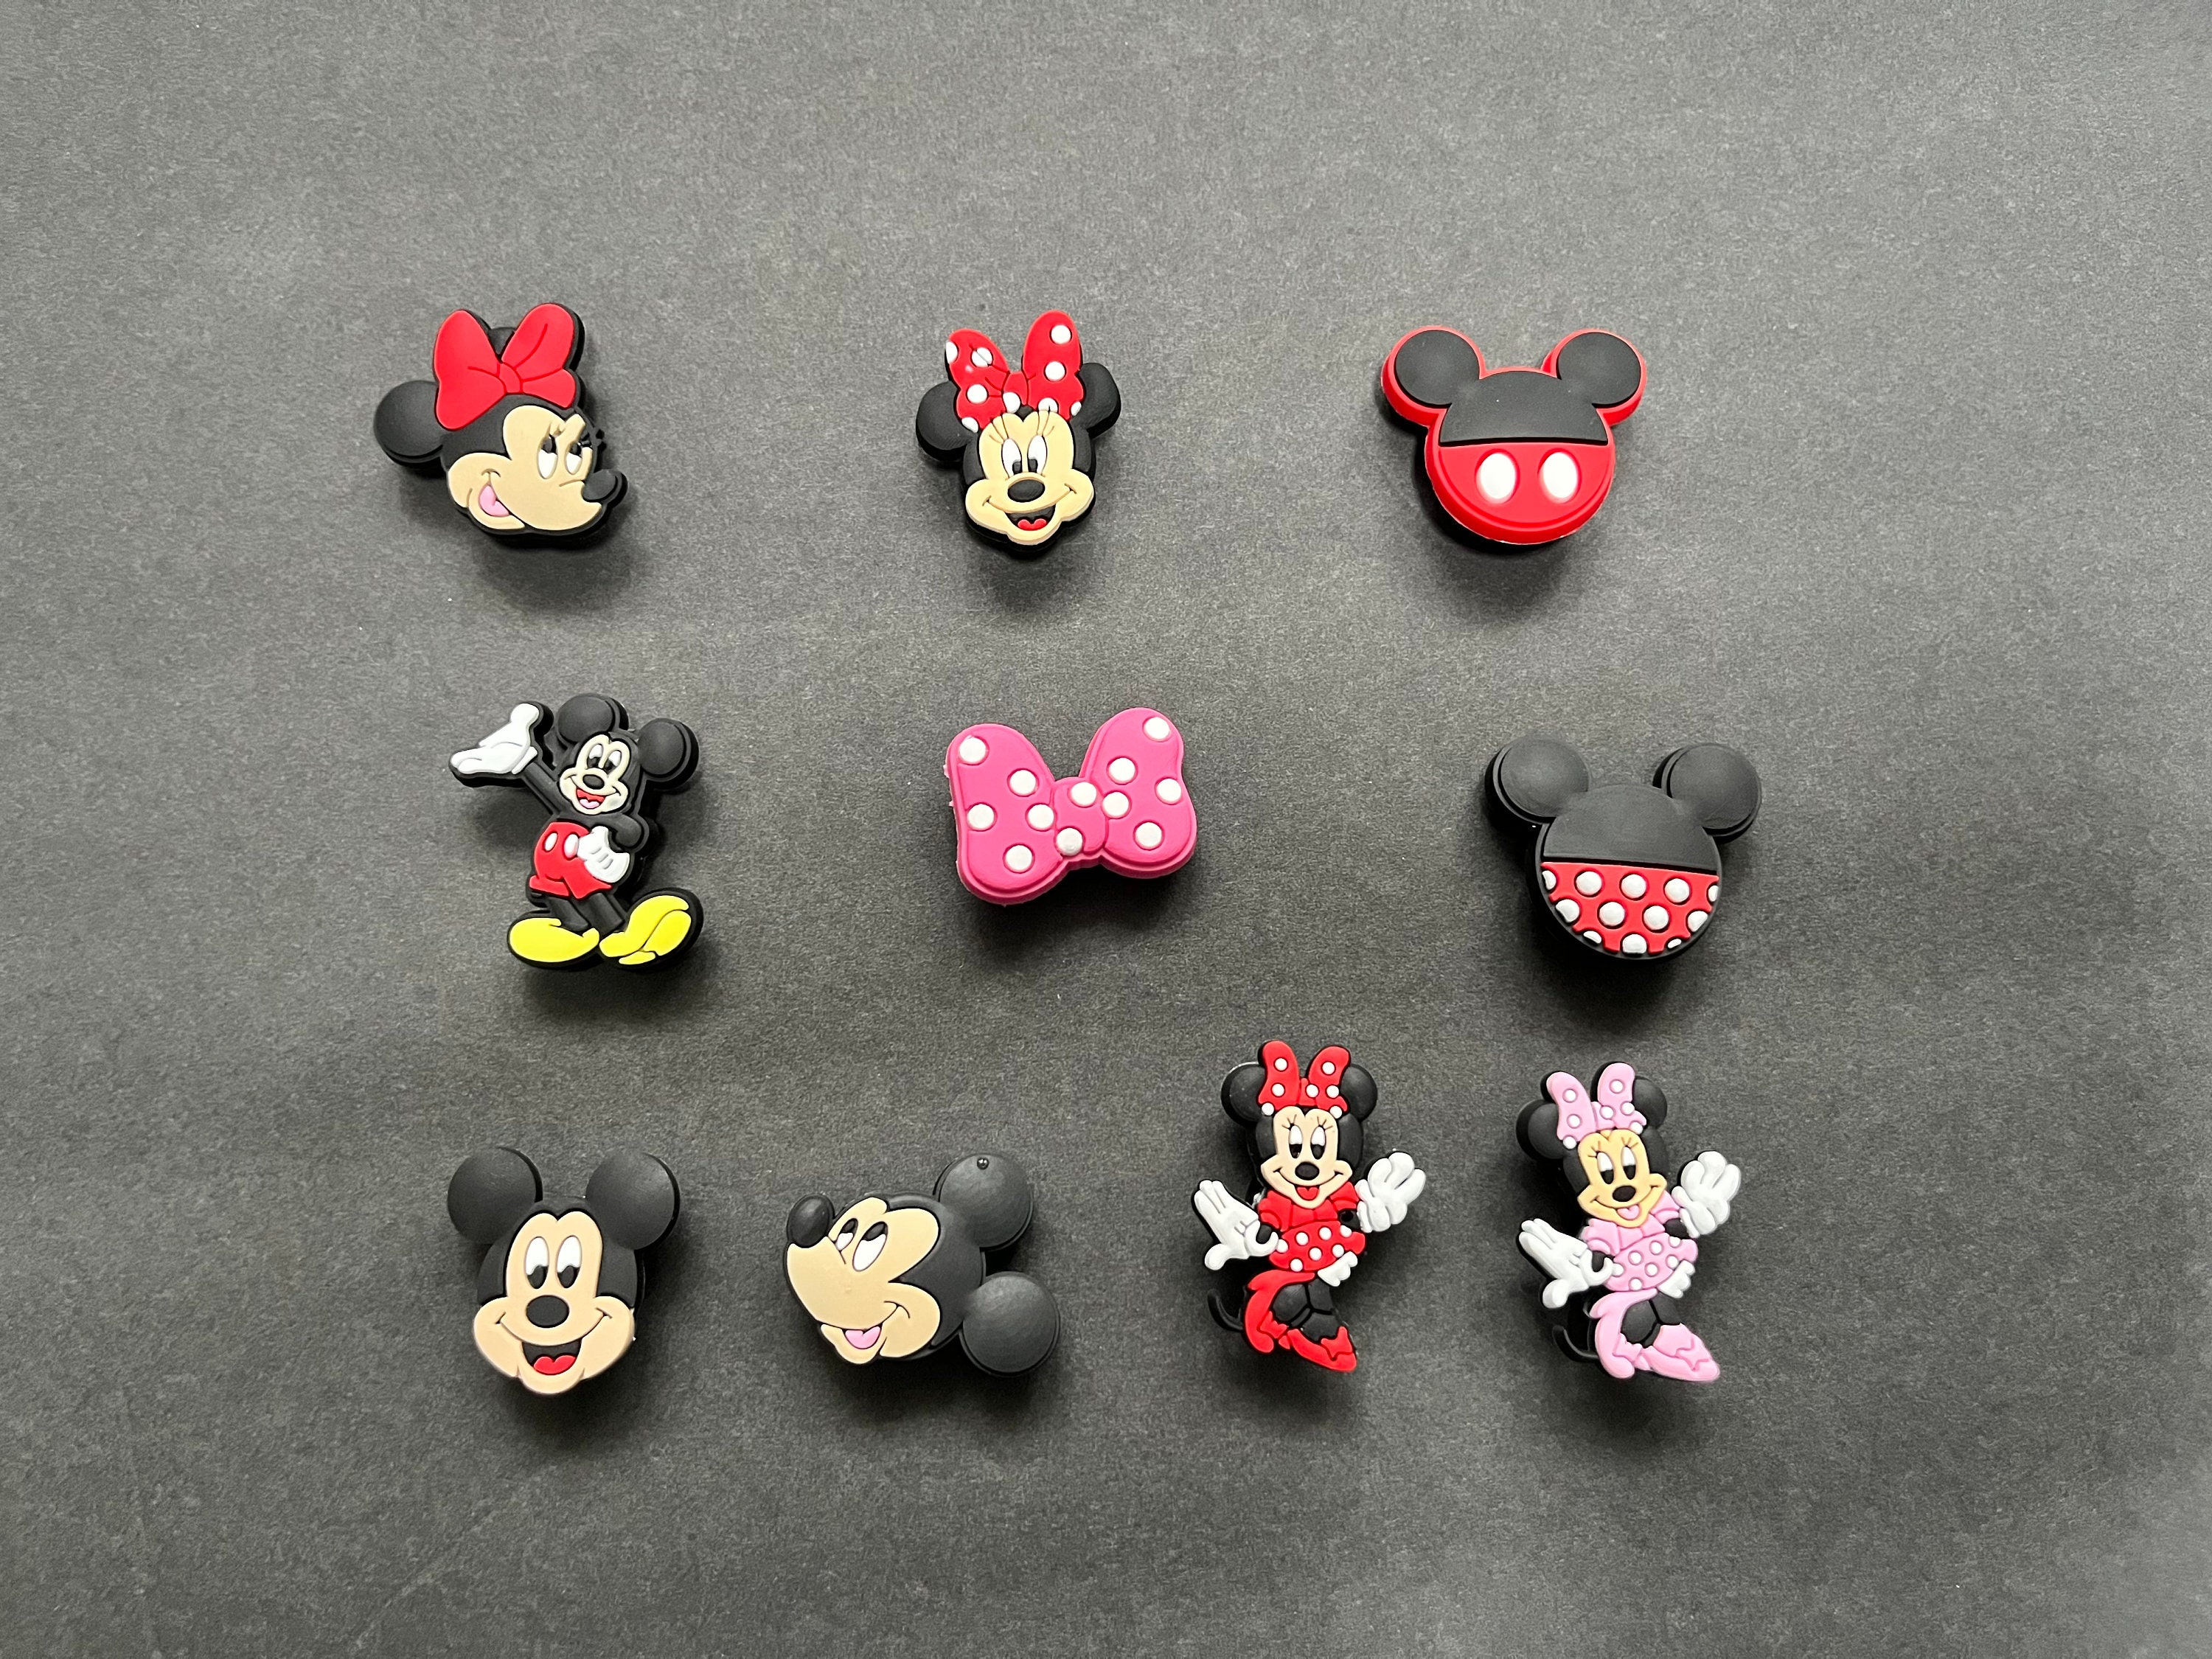 4Pcs Disney Mickey Mouse Croc Charms Shoe Accessories Cute Decoration PVC  Badges Bundle Set Gifts - 90sfootwear - Custom Graphic Printed Footwear -  Shoes - Boots - Slippers - Socks